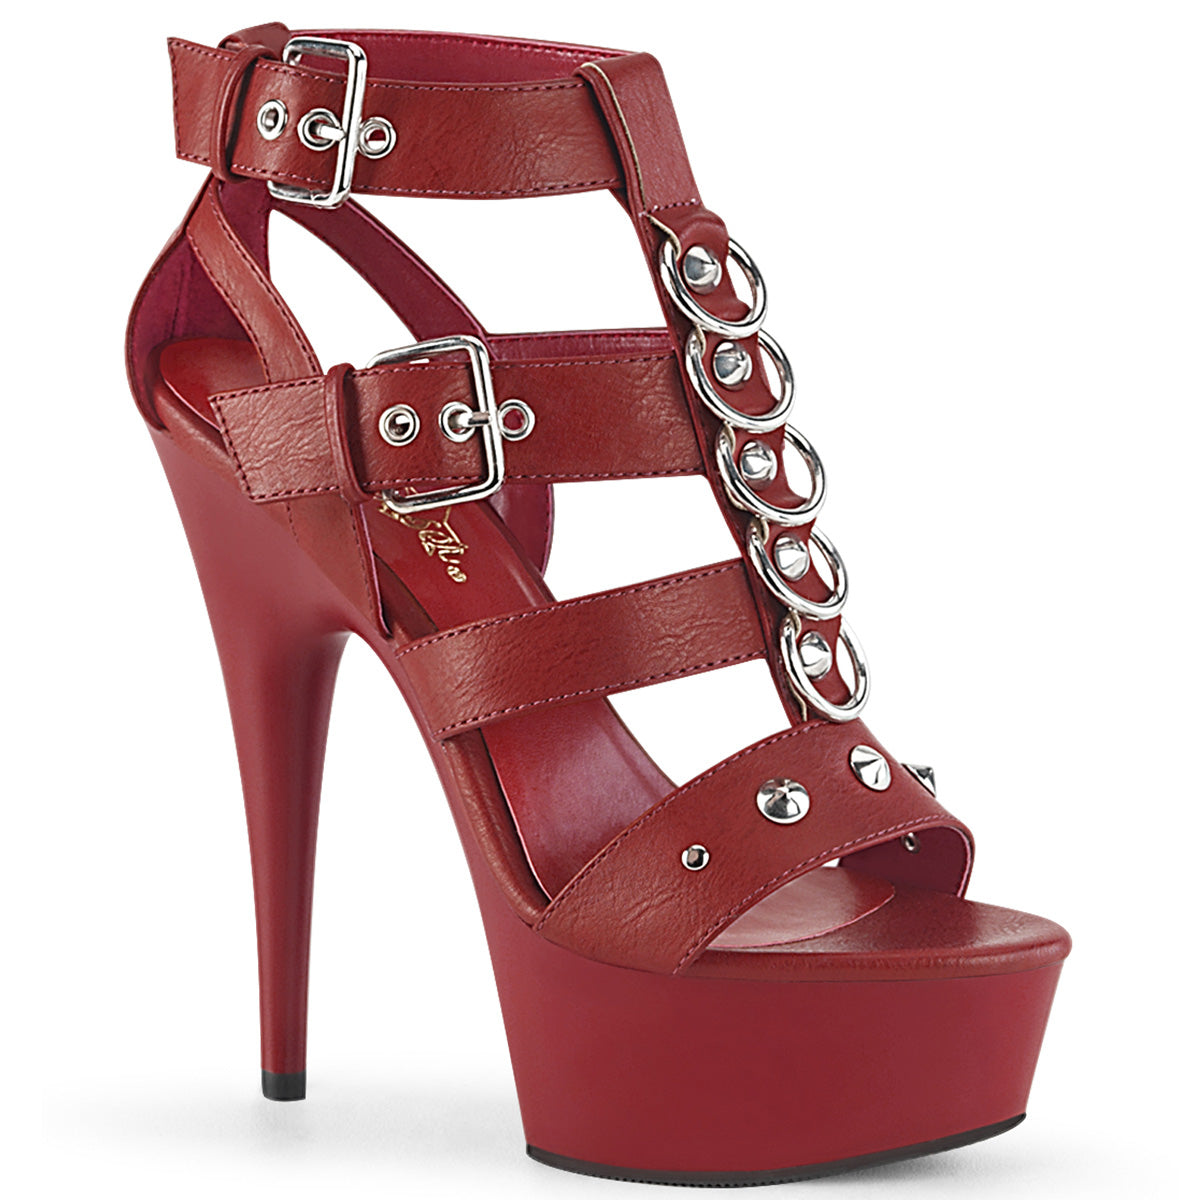 DELIGHT-658 Red Faux Leather Sandals